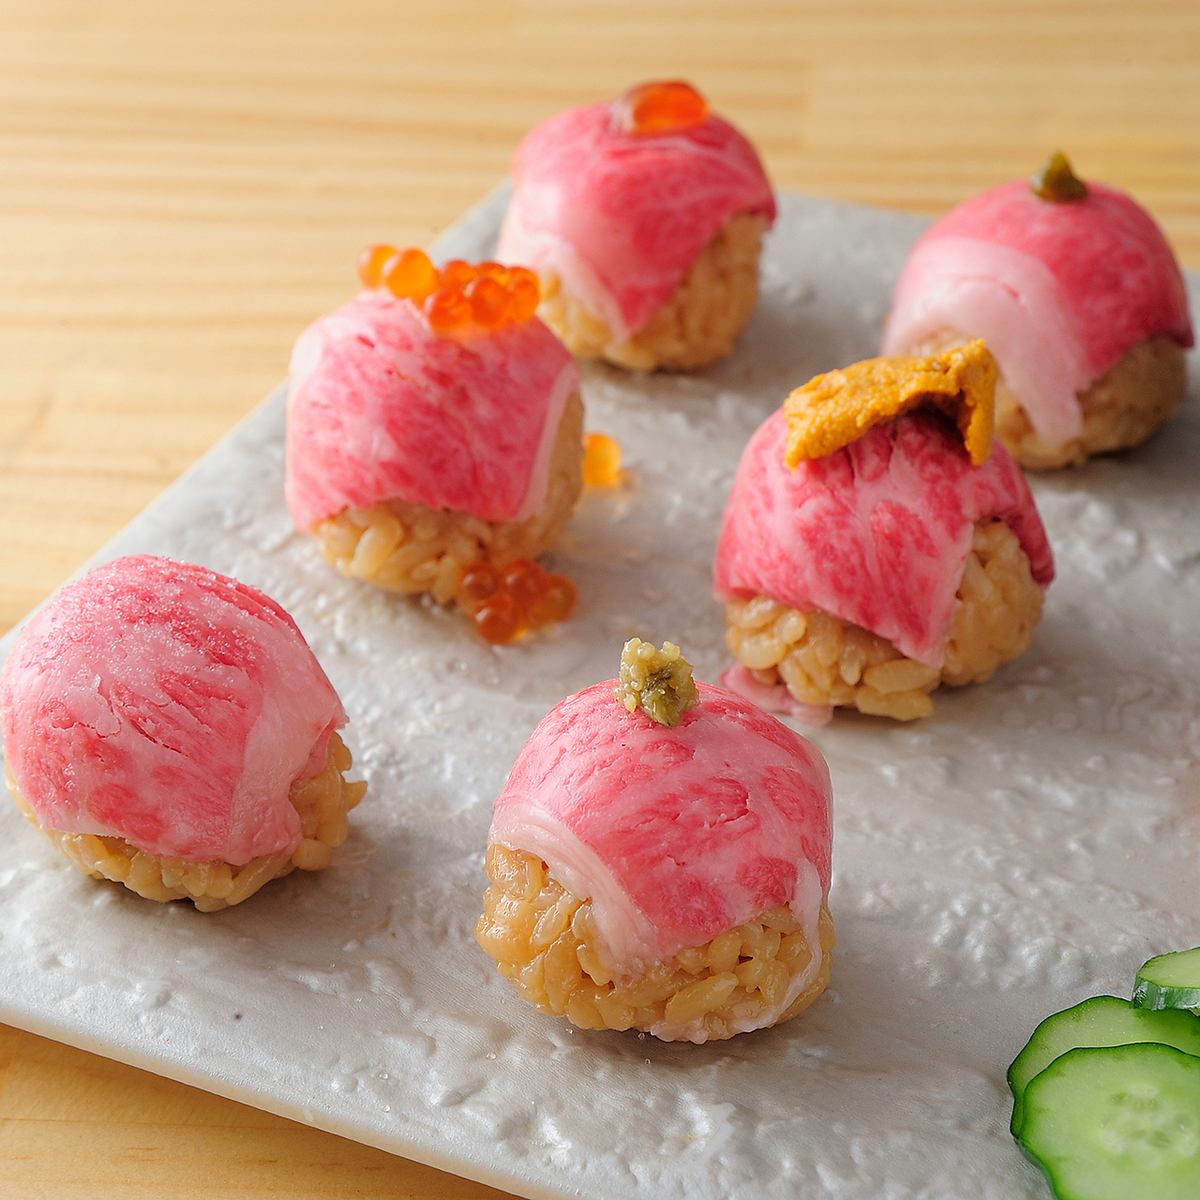 "Muni Original Meat Ball Sushi" made with A5-ranked Japanese black beef